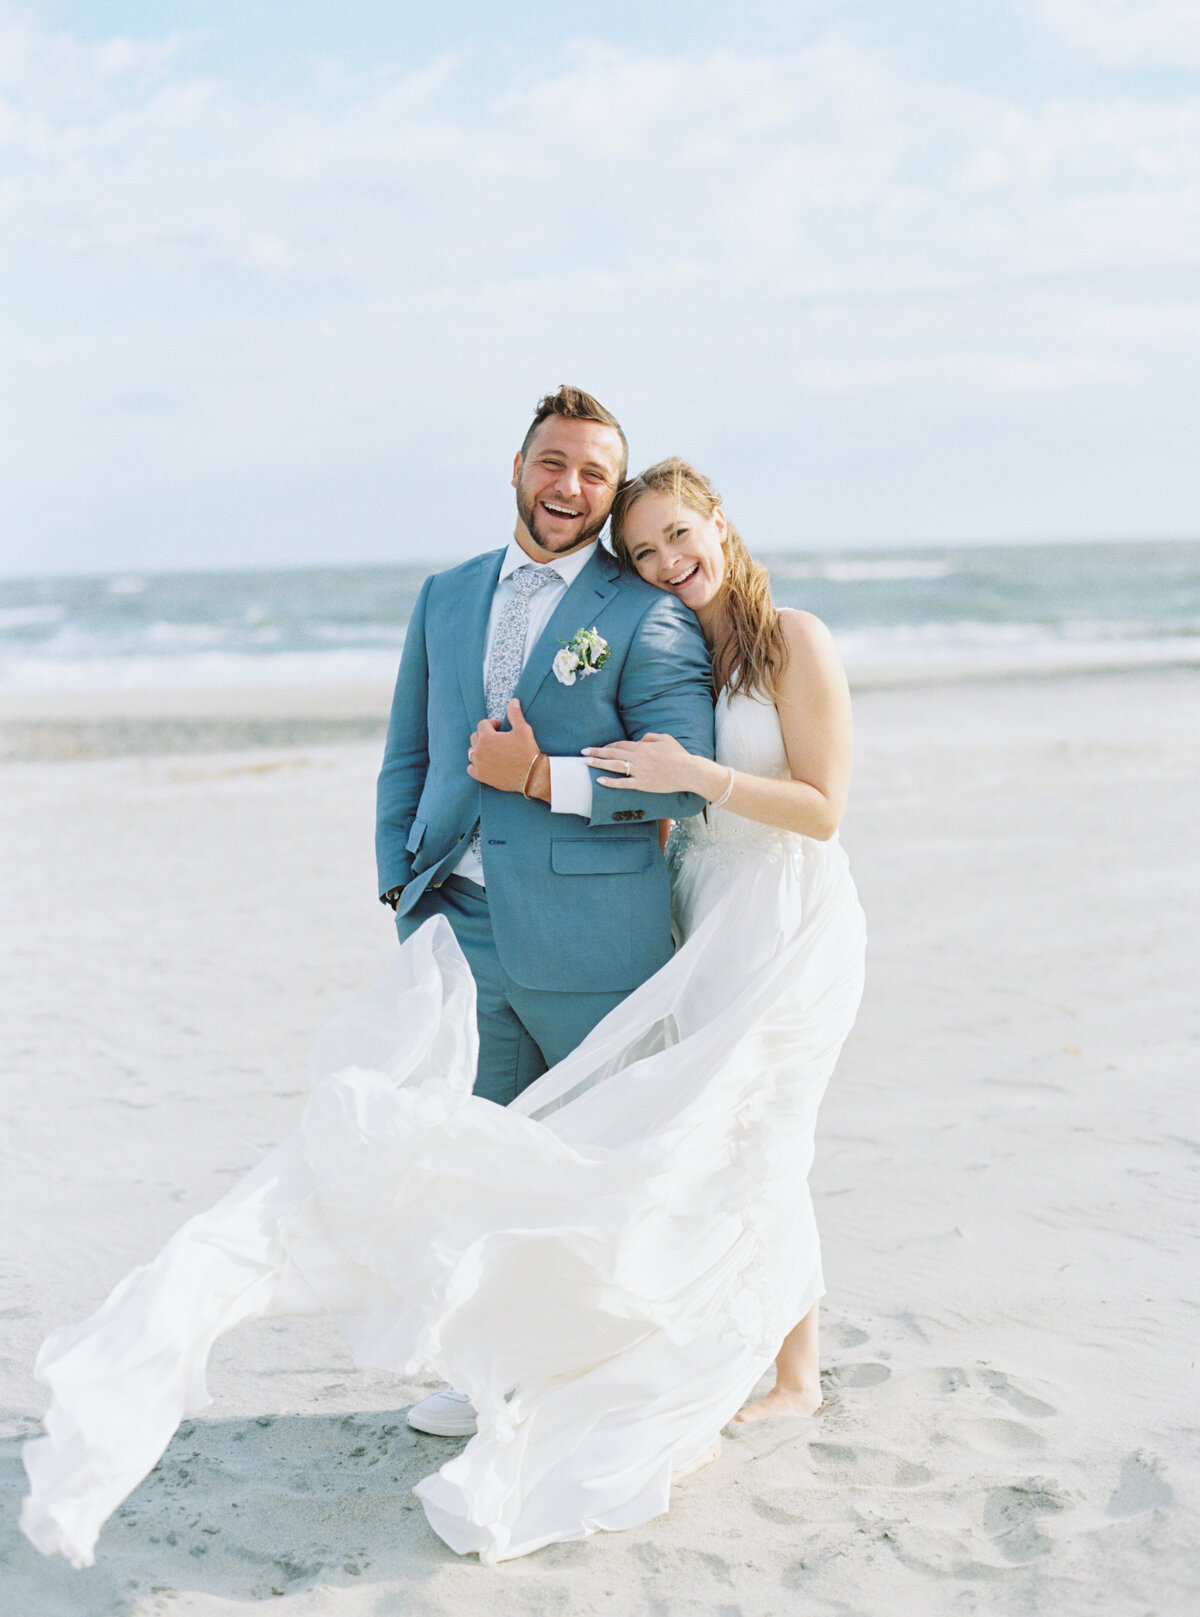 Charleston fall destination wedding. Bride and groom laughing on the beach.